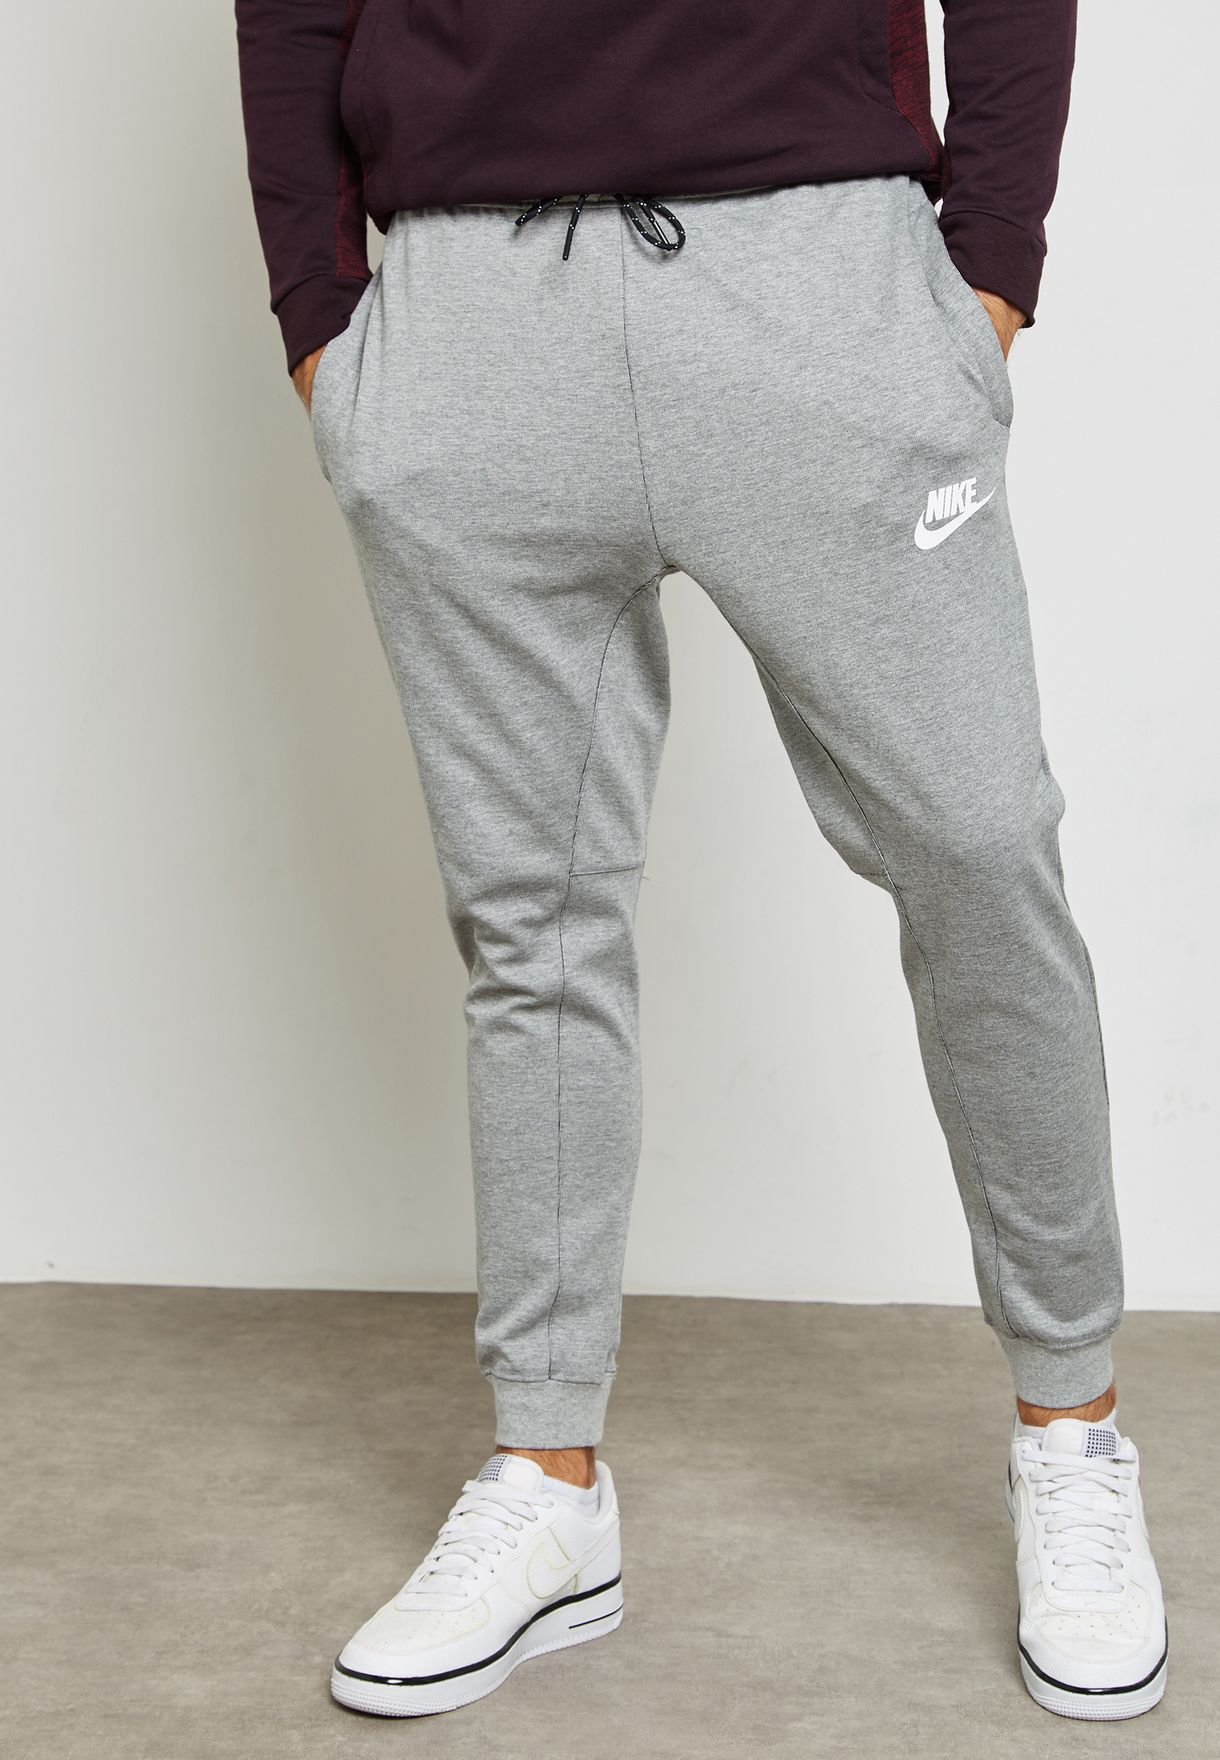 gray nike outfit